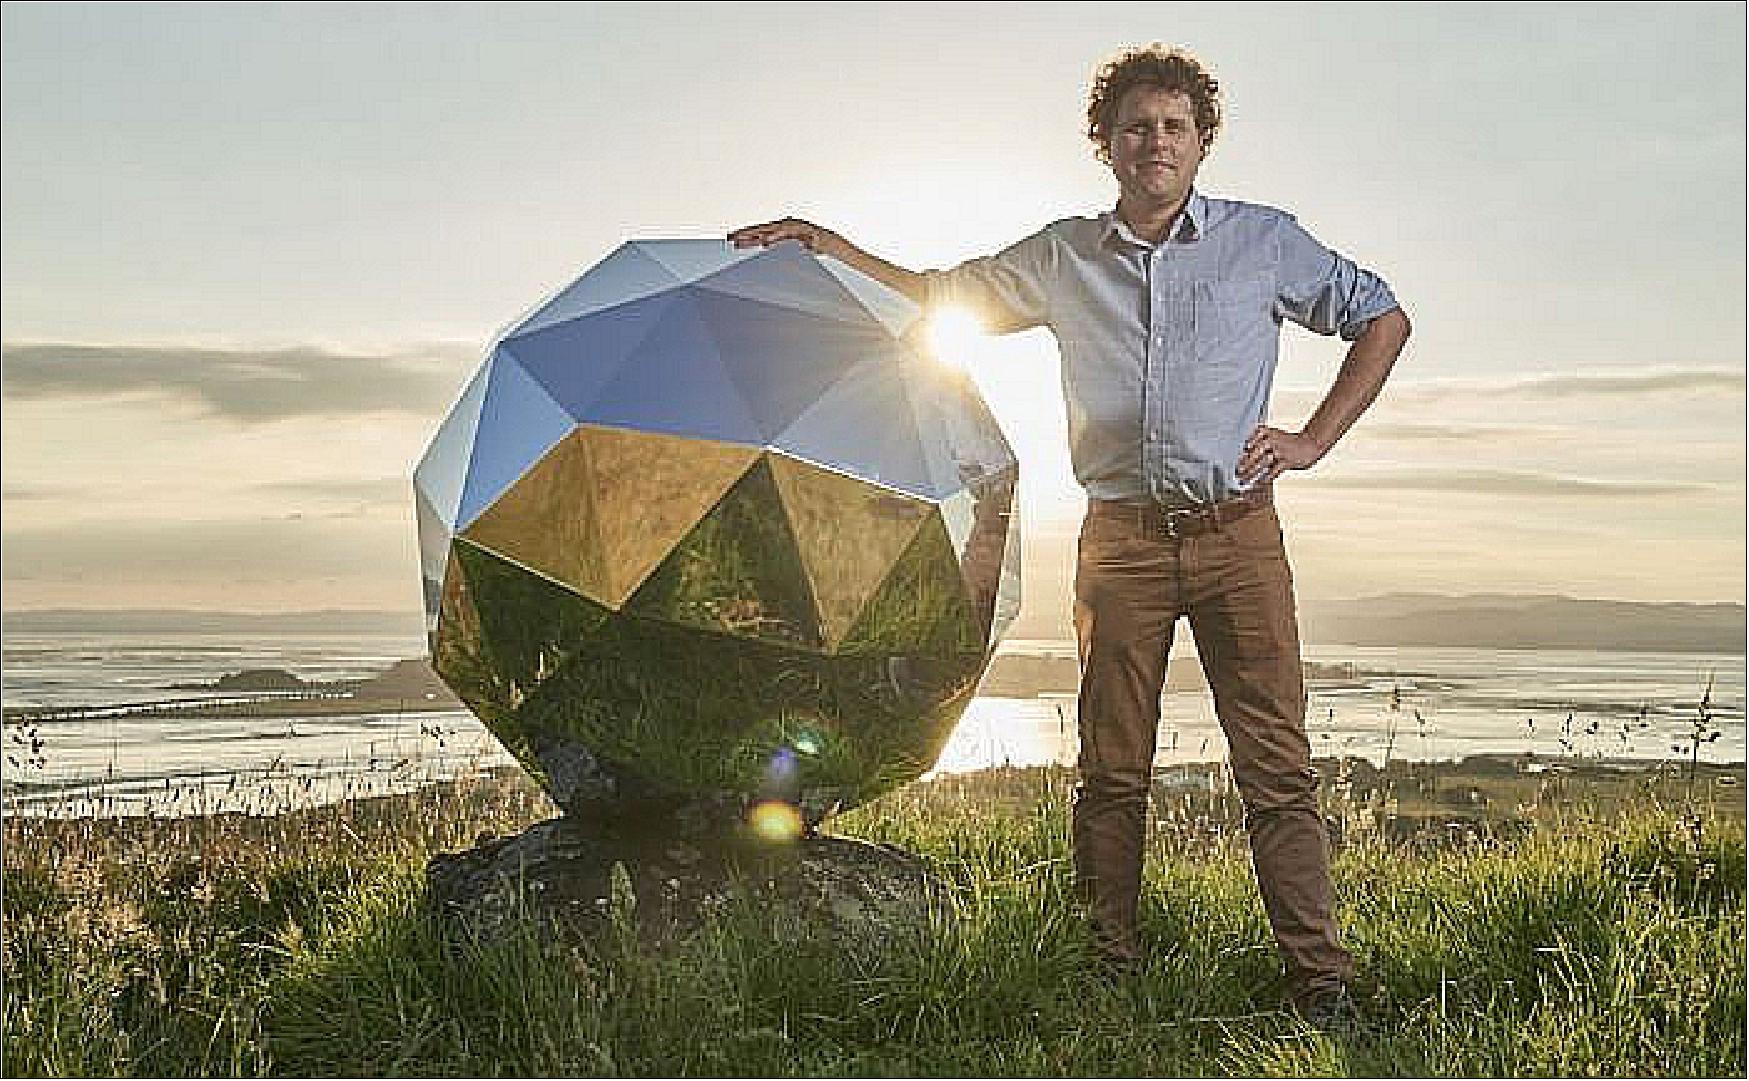 Figure 64: Peter Beck, founder of Rocket Lab, is shown with the Humanity Star (image credit: Rocket Lab)